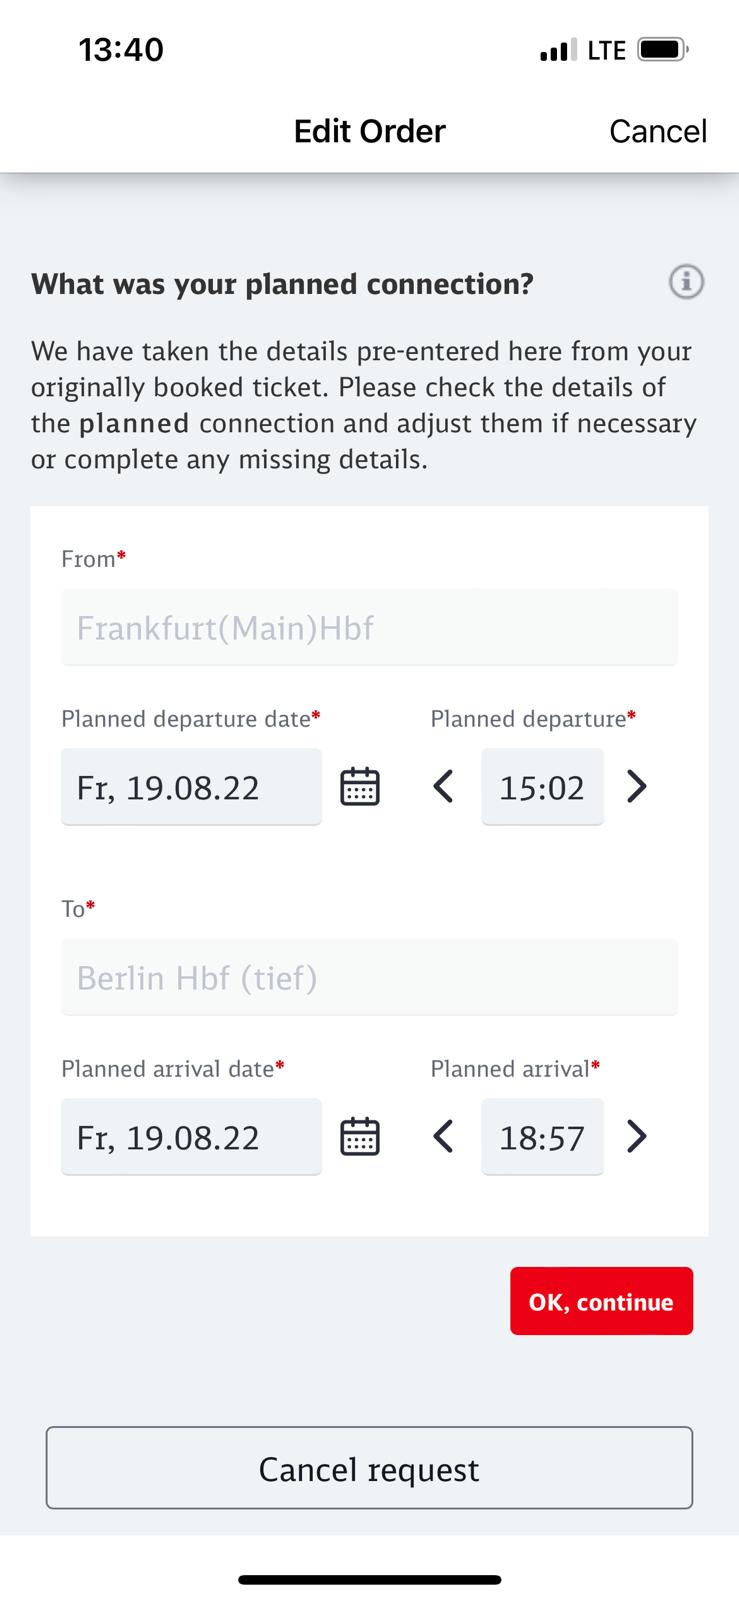 Planned arrival timing